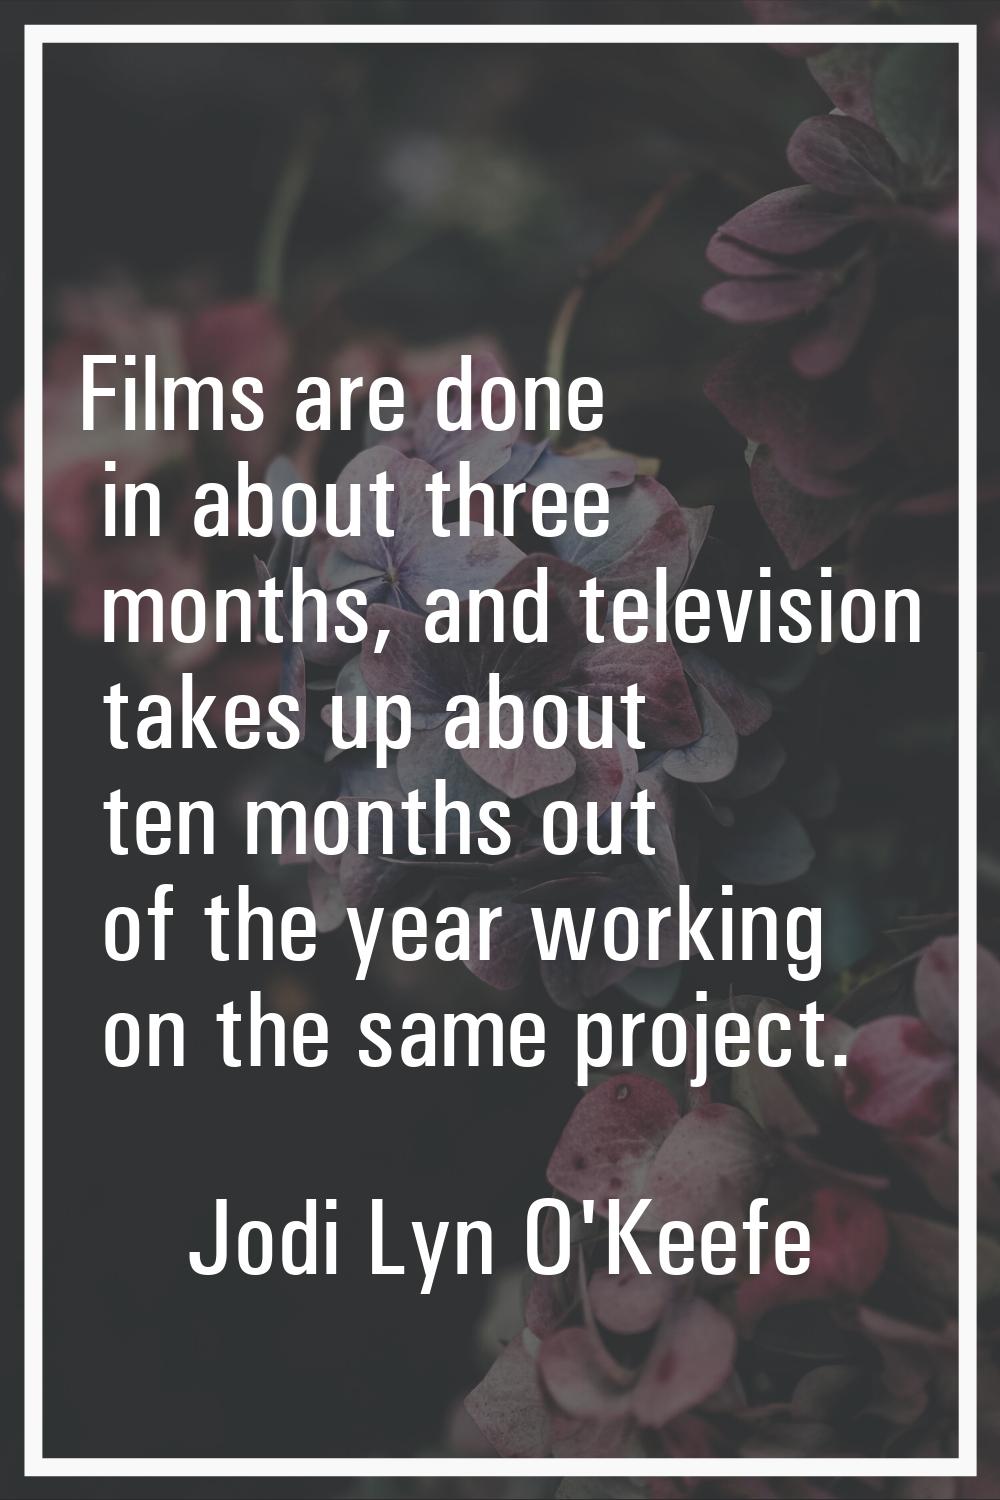 Films are done in about three months, and television takes up about ten months out of the year work